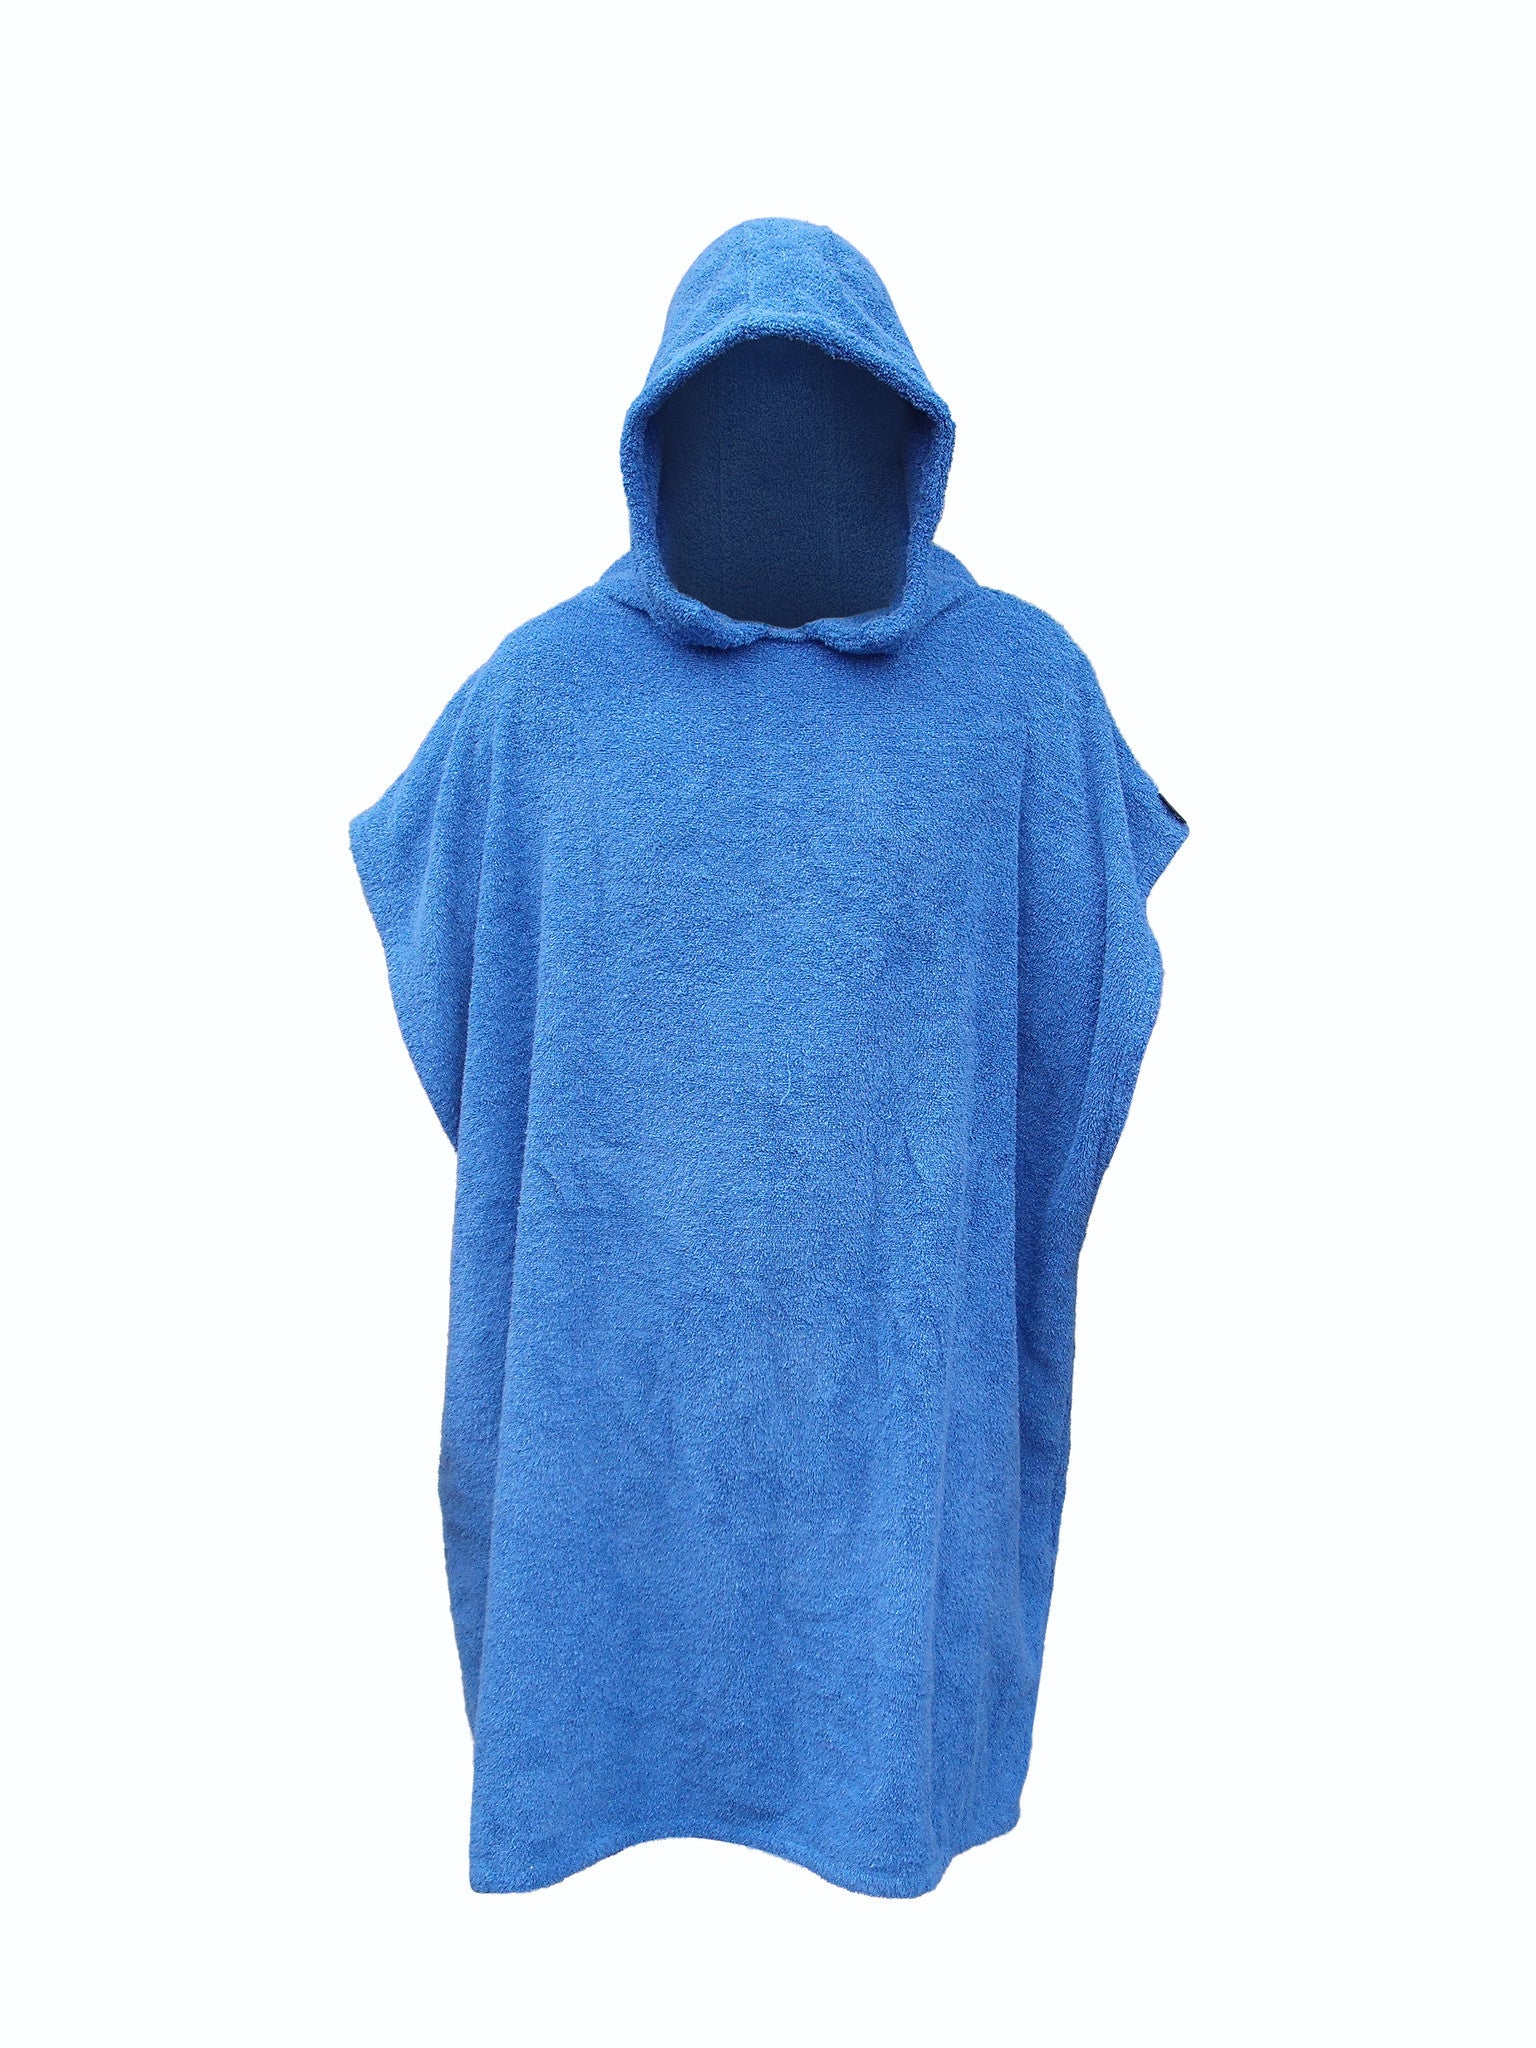 COR Surf Poncho Changing Towel Robe with Hood and Front Pocket, Made of  Quick Dry Microfiber (Medium, Sarape)